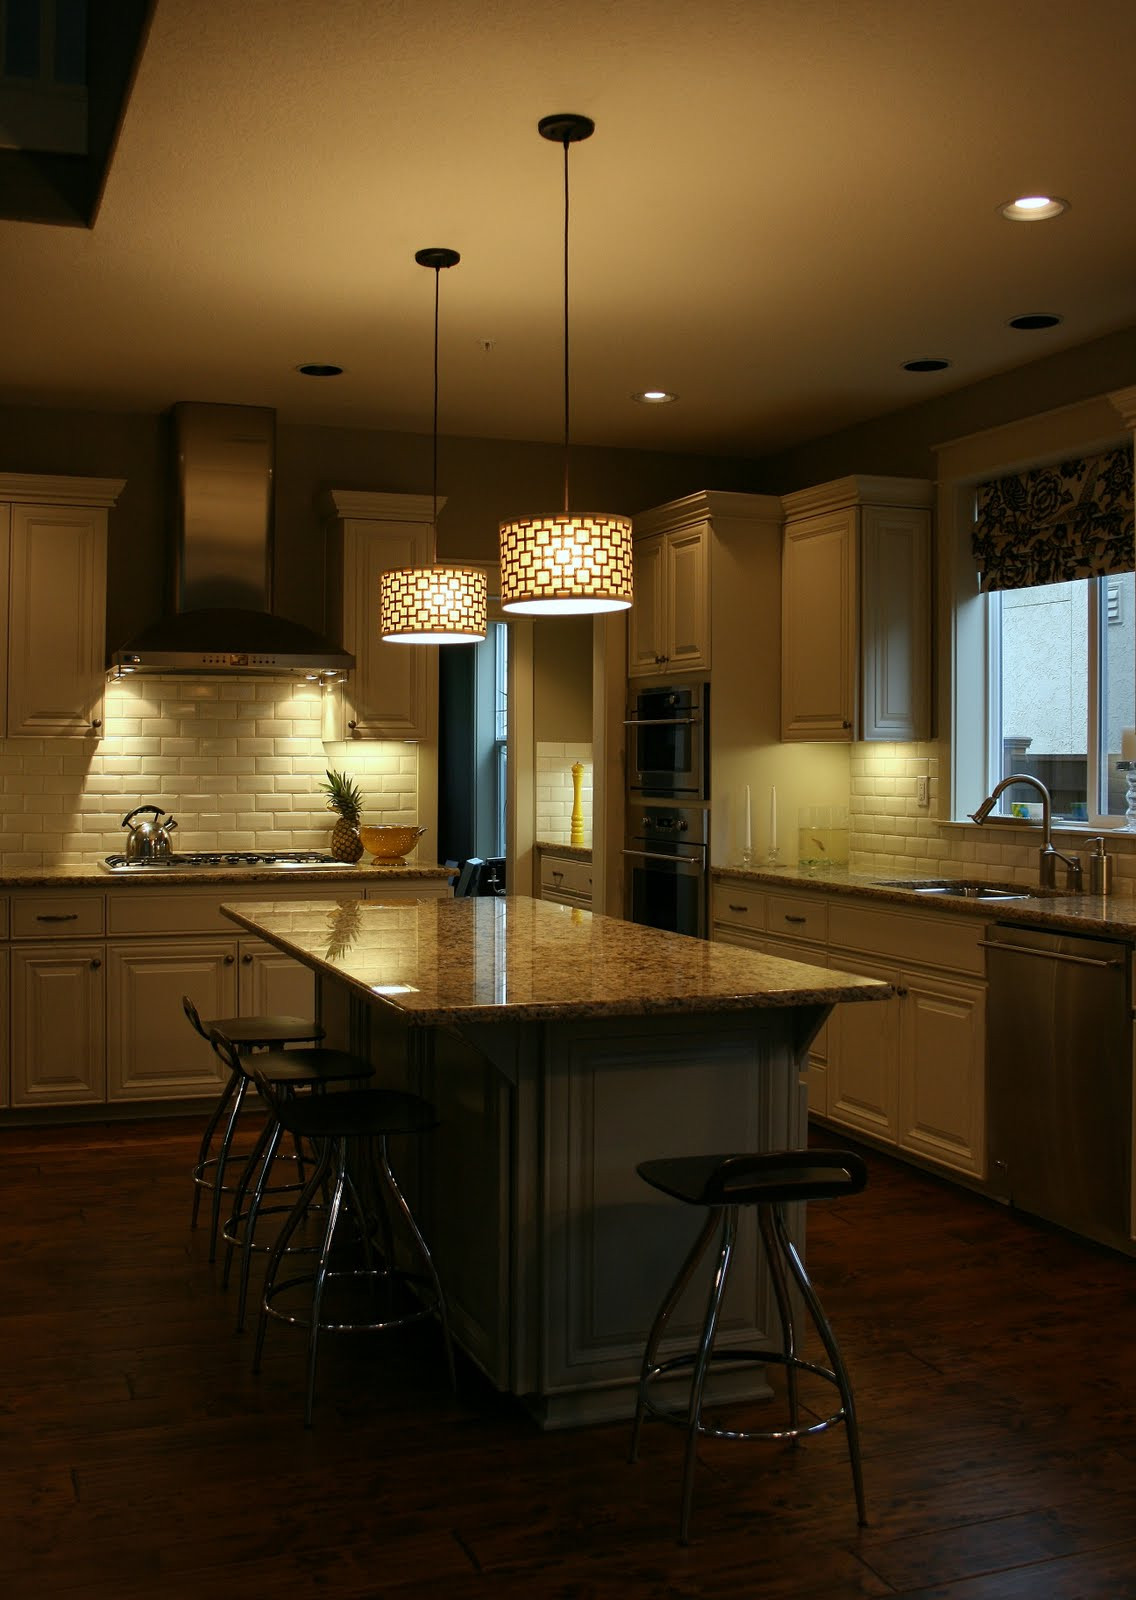 Island Kitchen Lights
 Kitchen Island Lighting System with Pendant and Chandelier